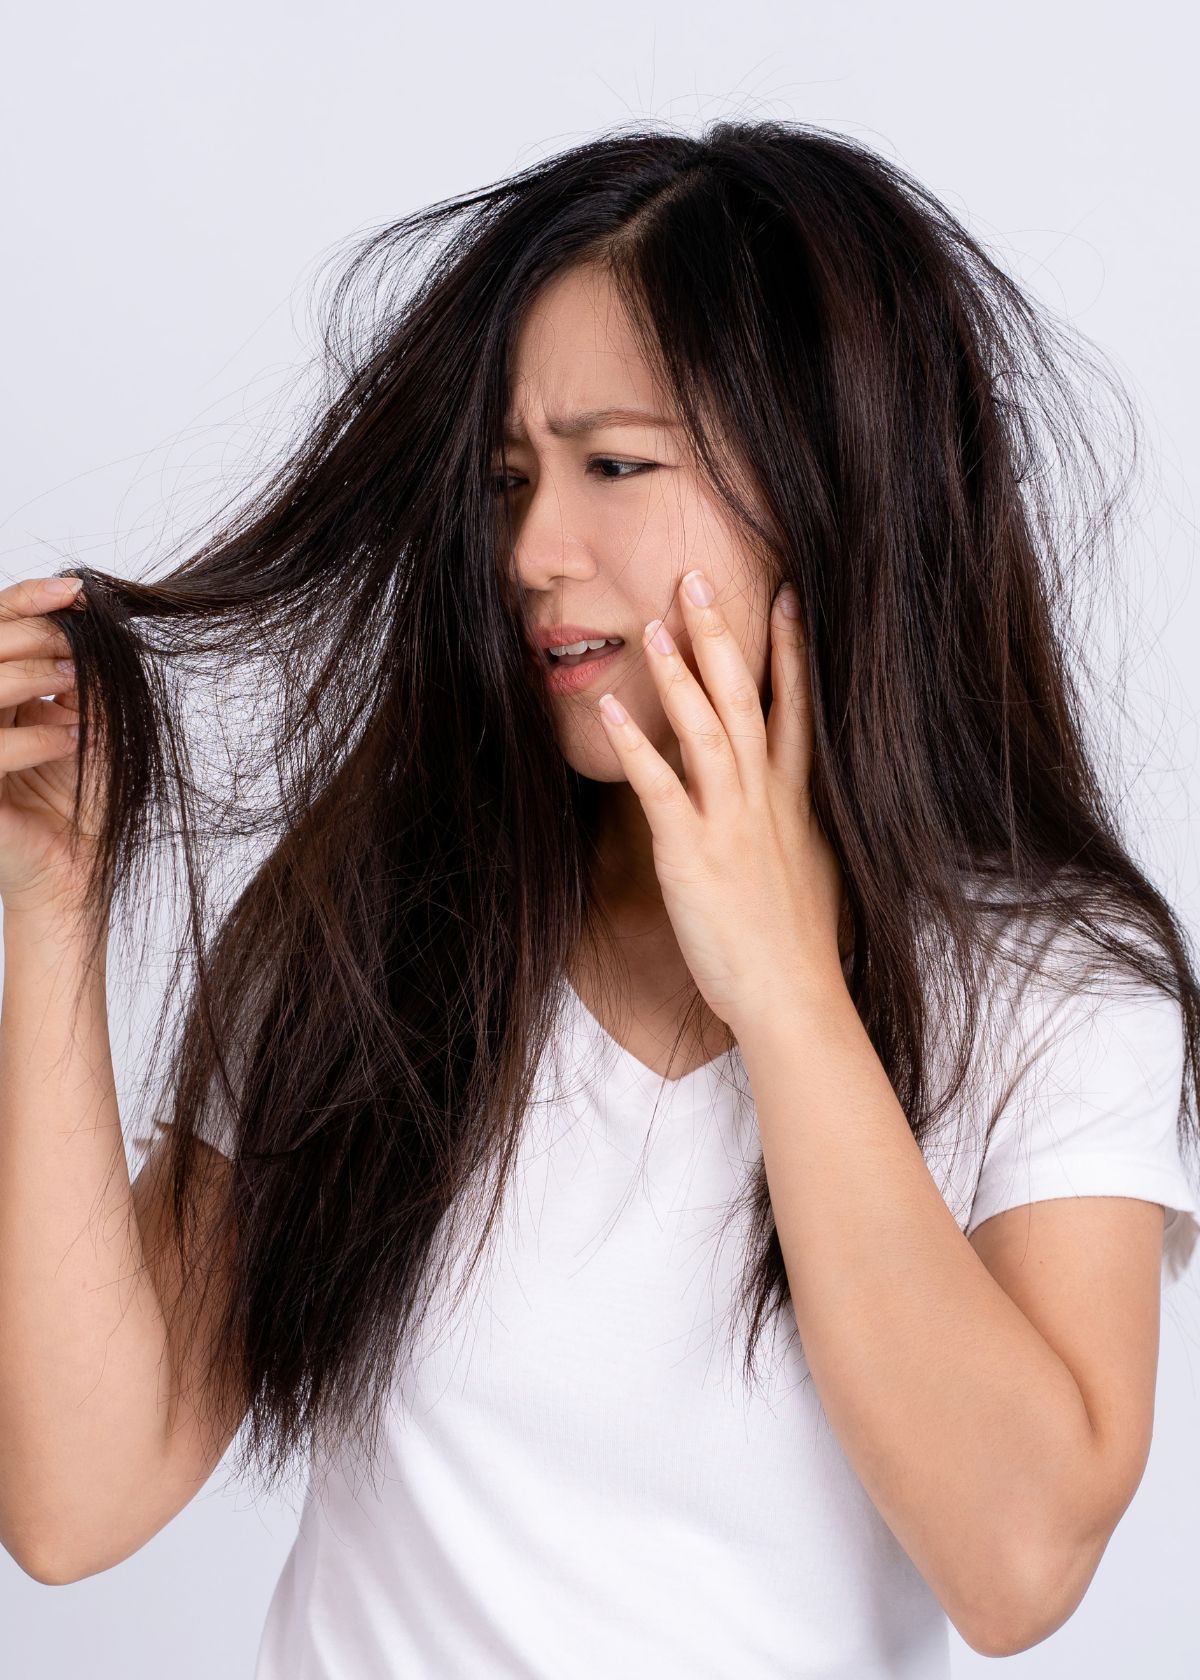 5 Best Shampoo and Conditioner for Hair Breakage